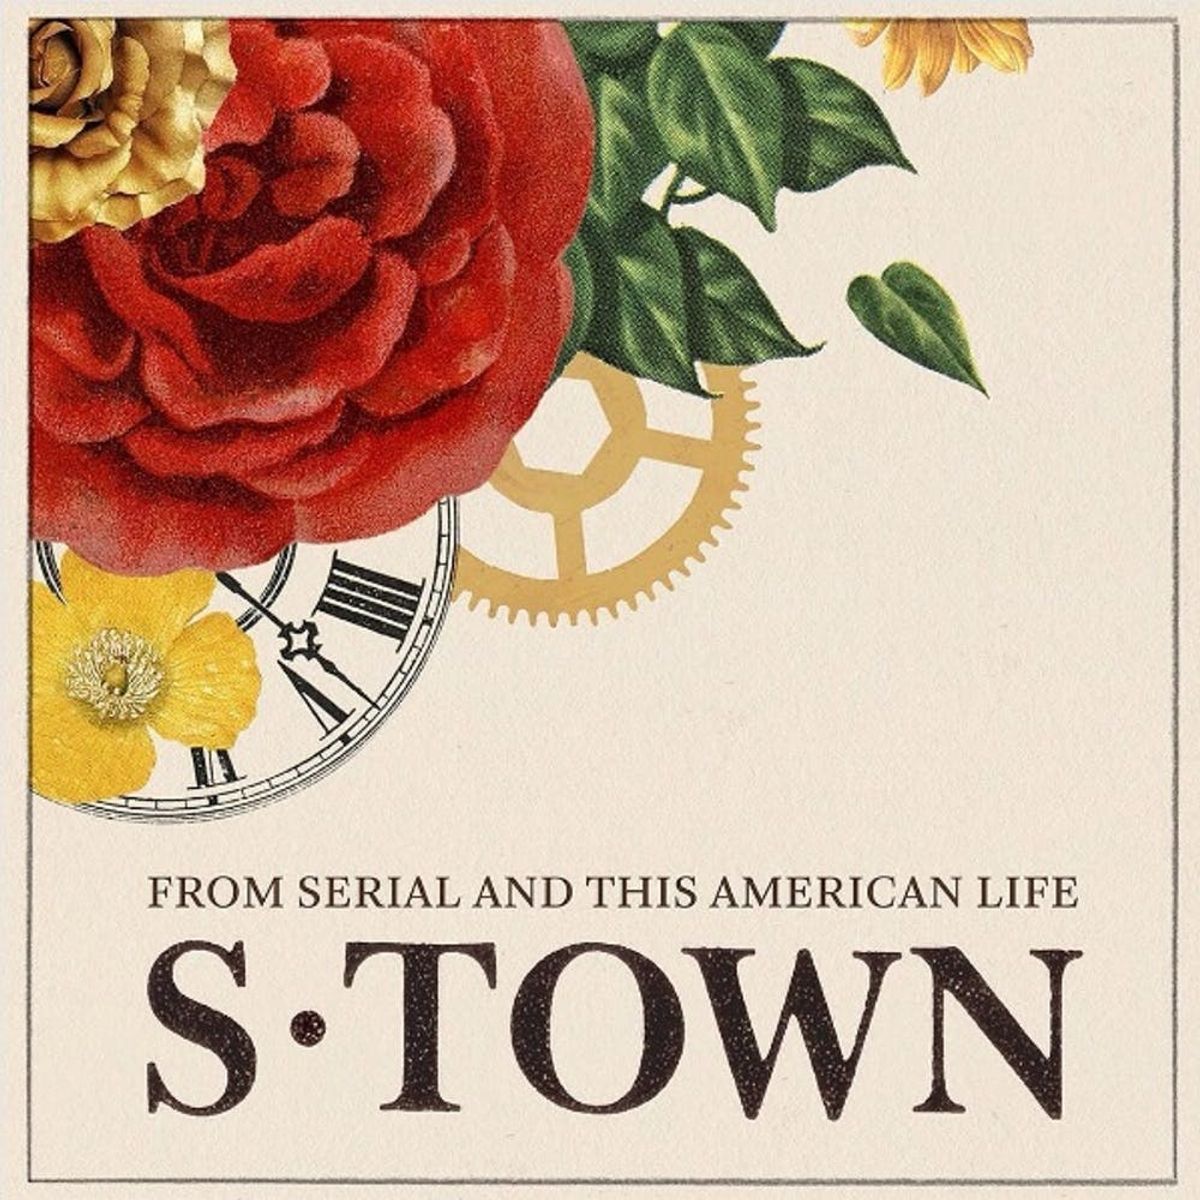 Here Are Five Reasons the New S-Town Podcast Will Be Even Bigger Than Serial